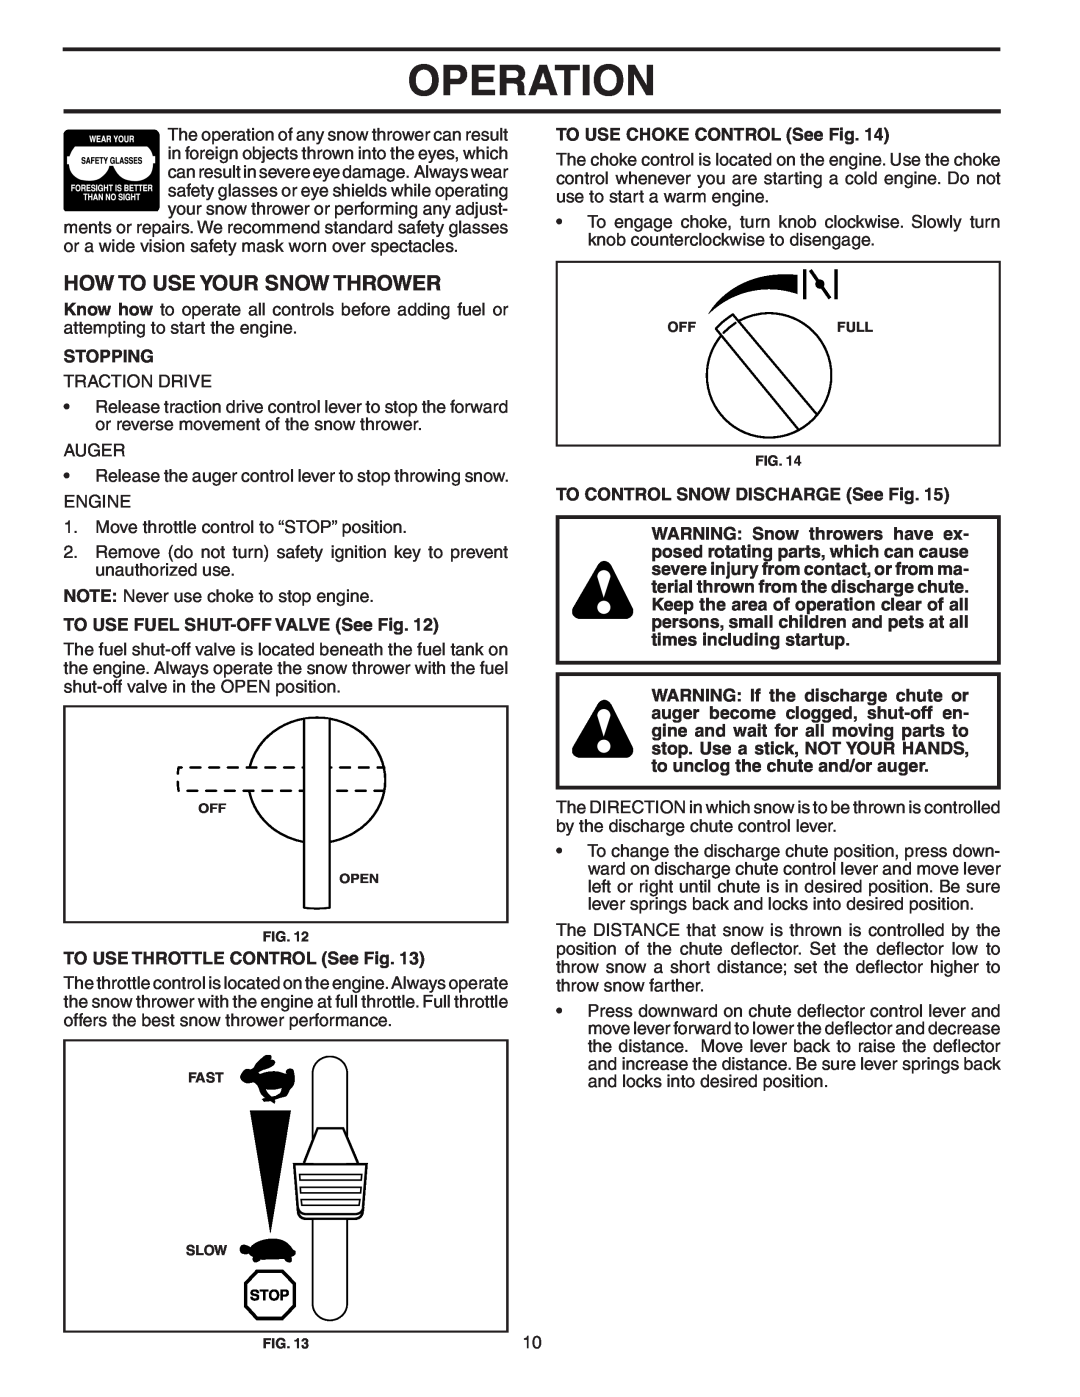 Poulan 183616 owner manual How To Use Your Snow Thrower, Operation, Stopping, TO USE FUEL SHUT-OFF VALVE See Fig 